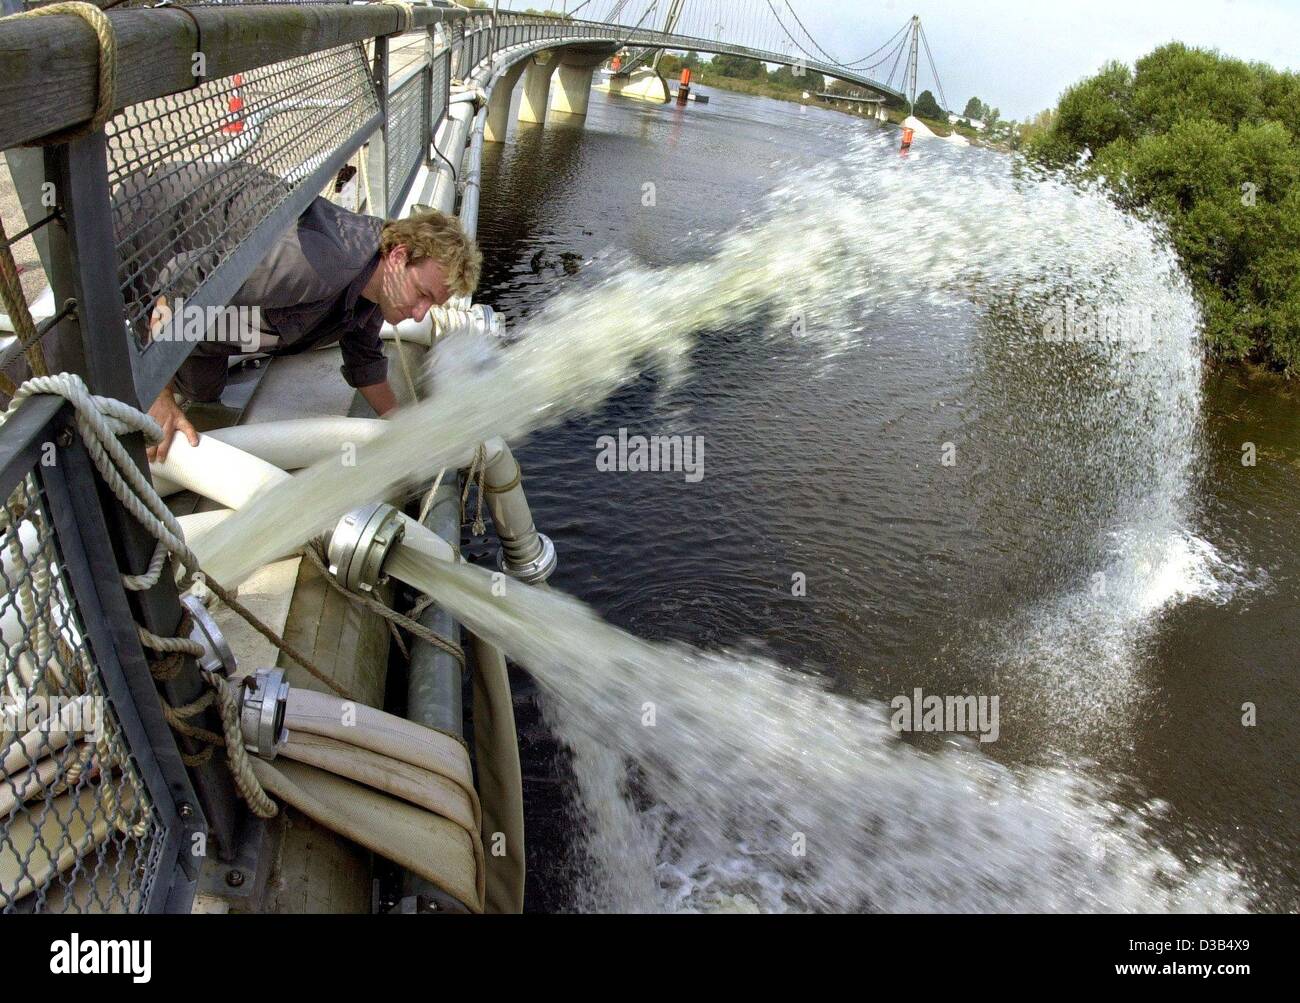 (dpa) - A helper of the Technisches Hilfswerk (Technical Helpers' Organisation) checks the hoses, through which the flood waters are pumped back into the river Elbe in Magdeburg-Herrenkrug, eastern Germany, 25 August 2002. Eastern parts of Magdeburg were flooded, drowning a hotel, a race track and a Stock Photo